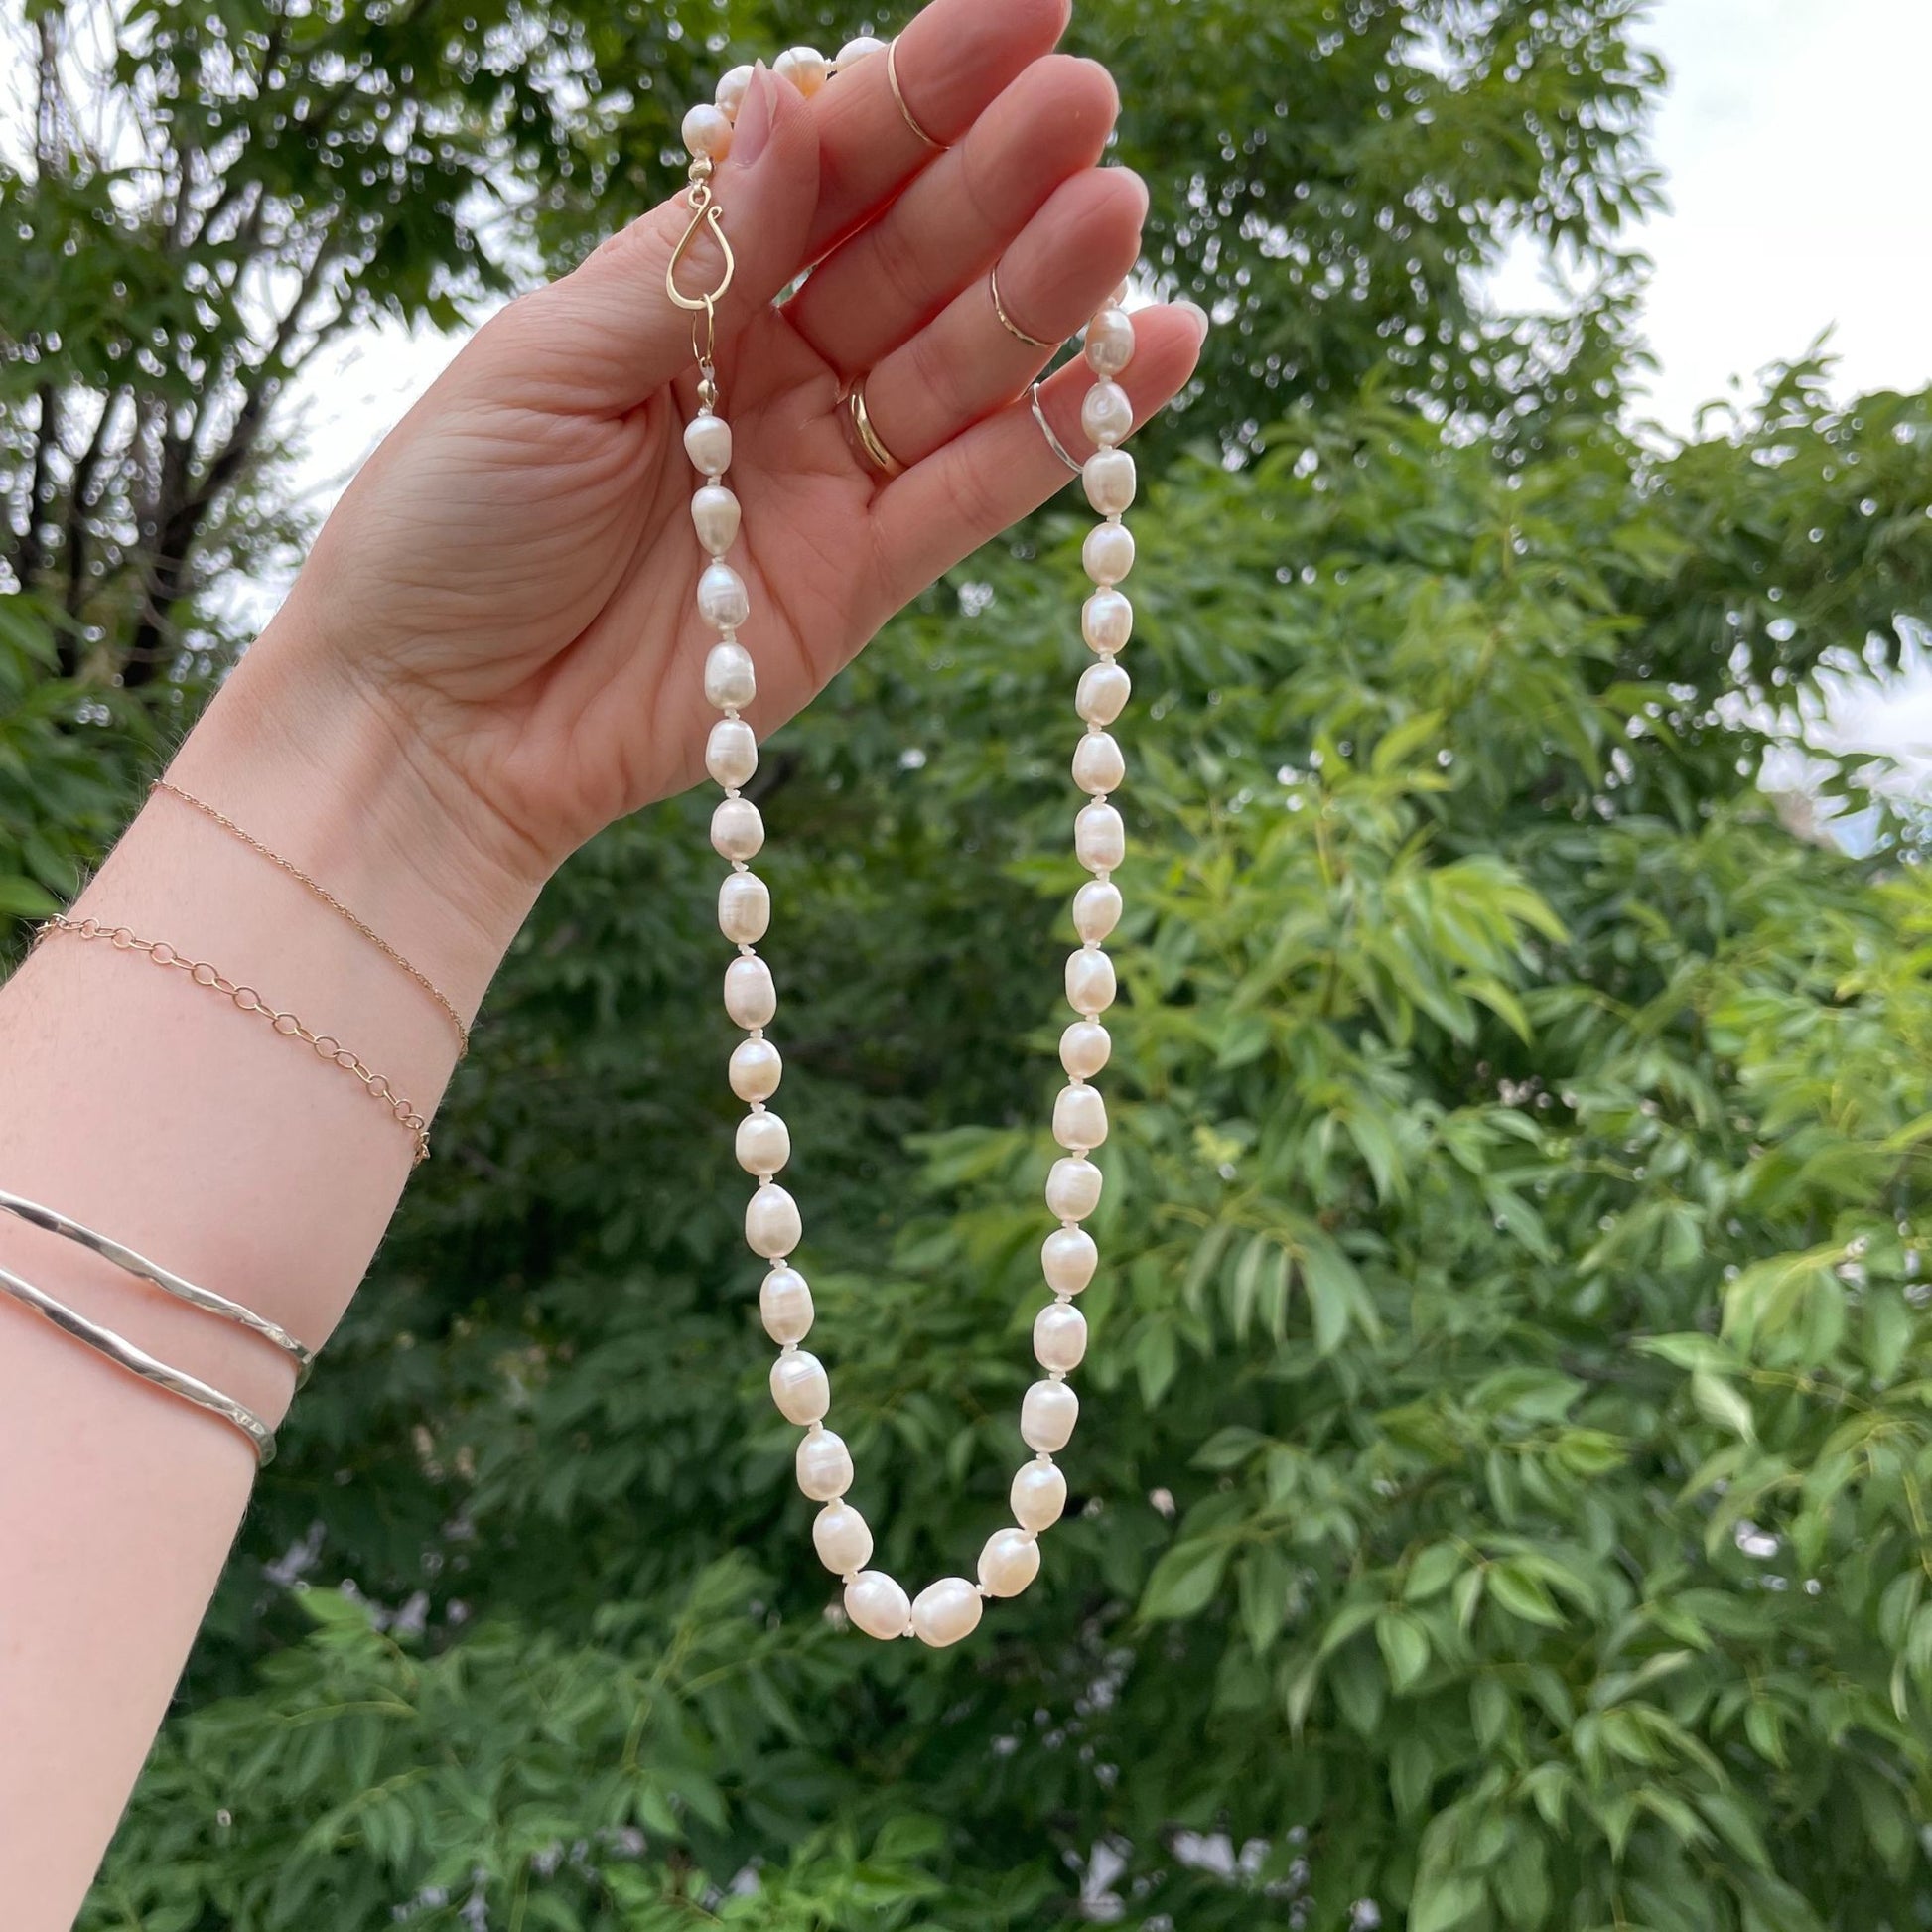 Sample of pearl necklace